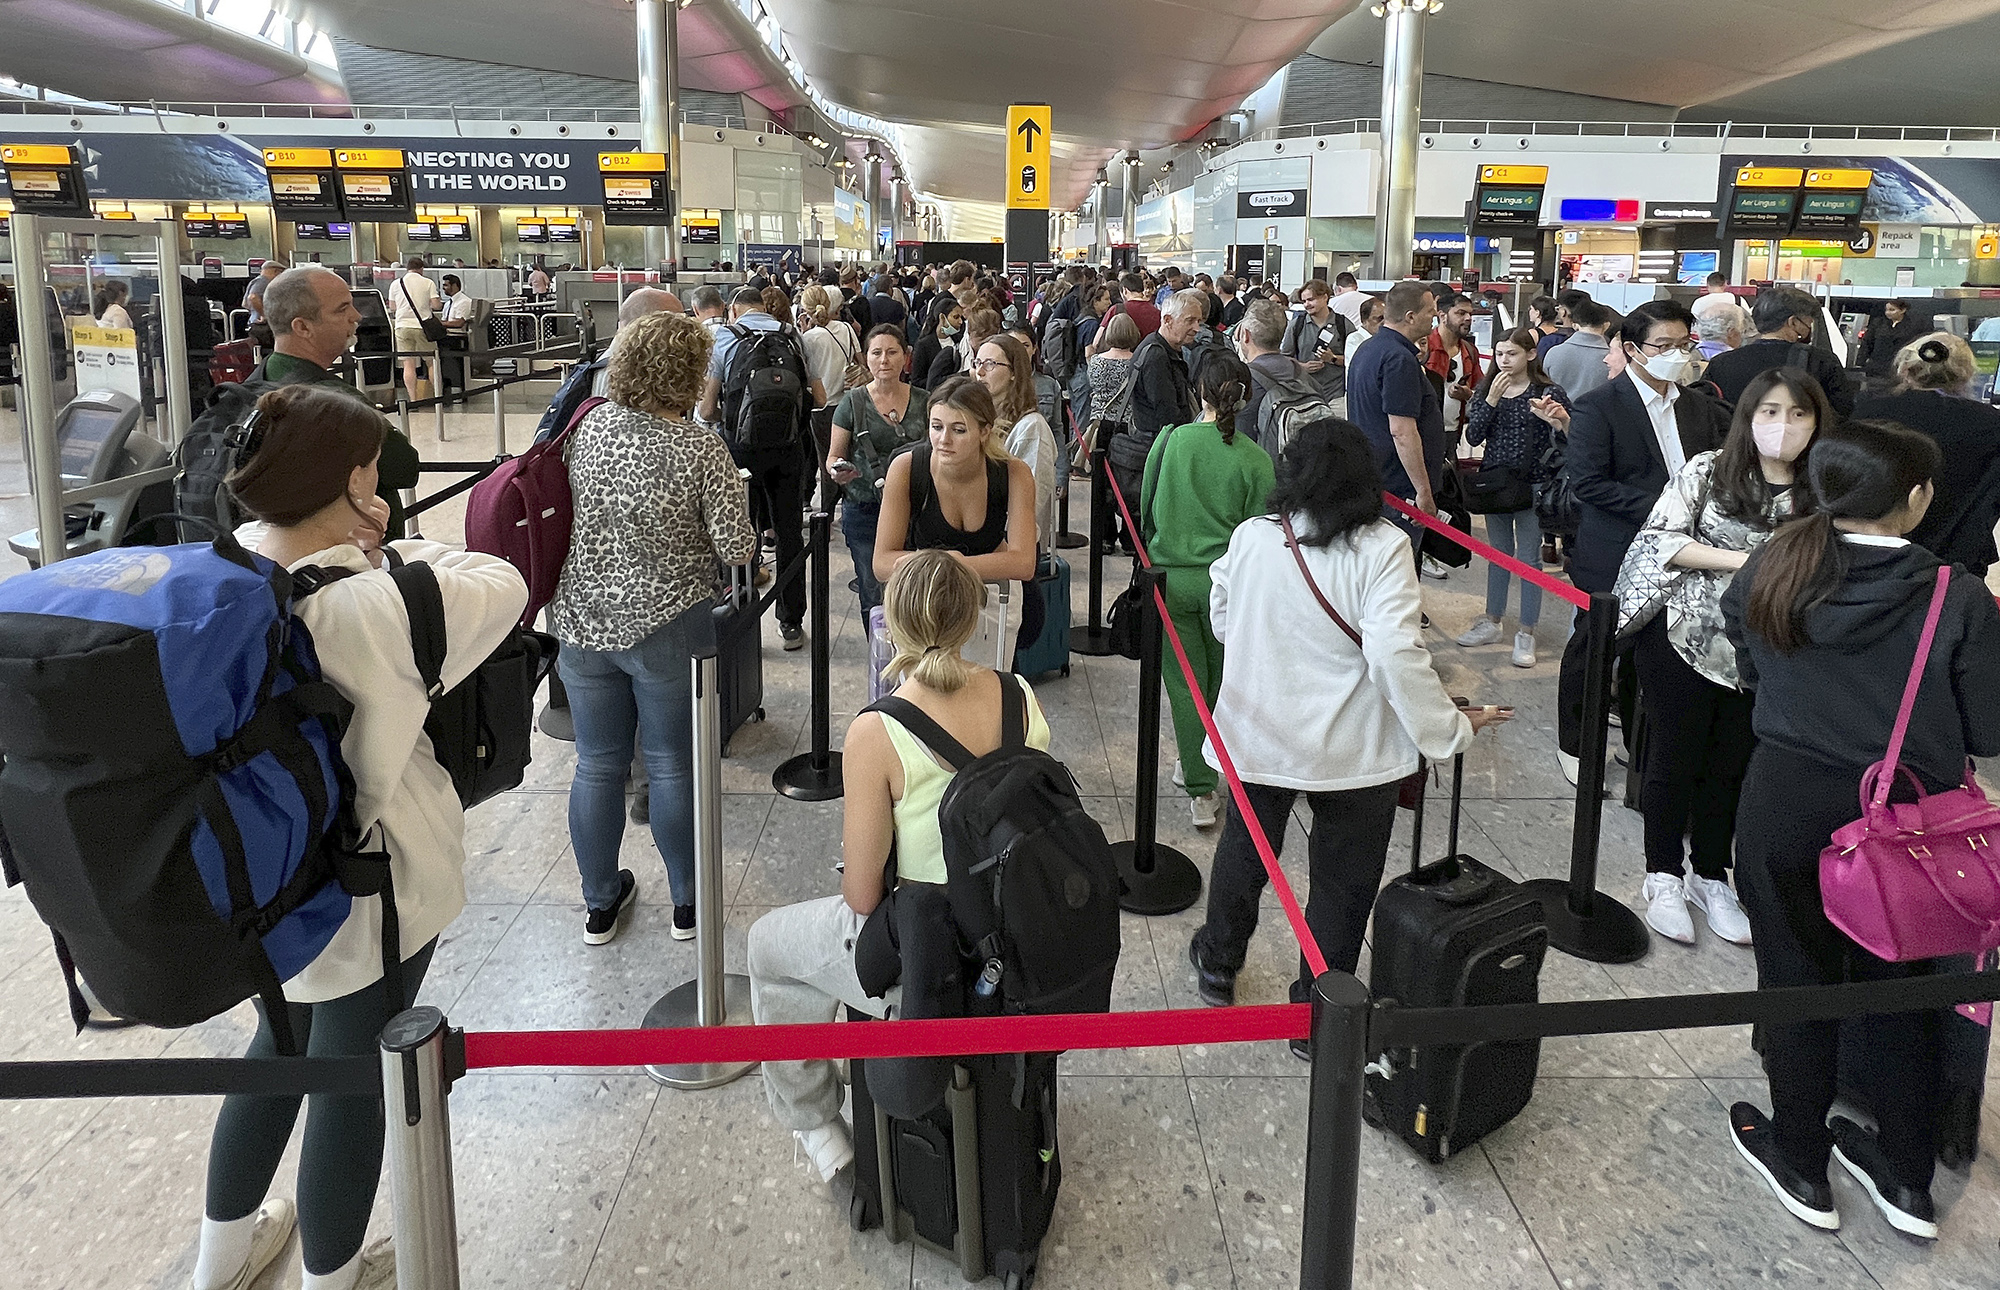 UK Travel quickly left City workers grounded